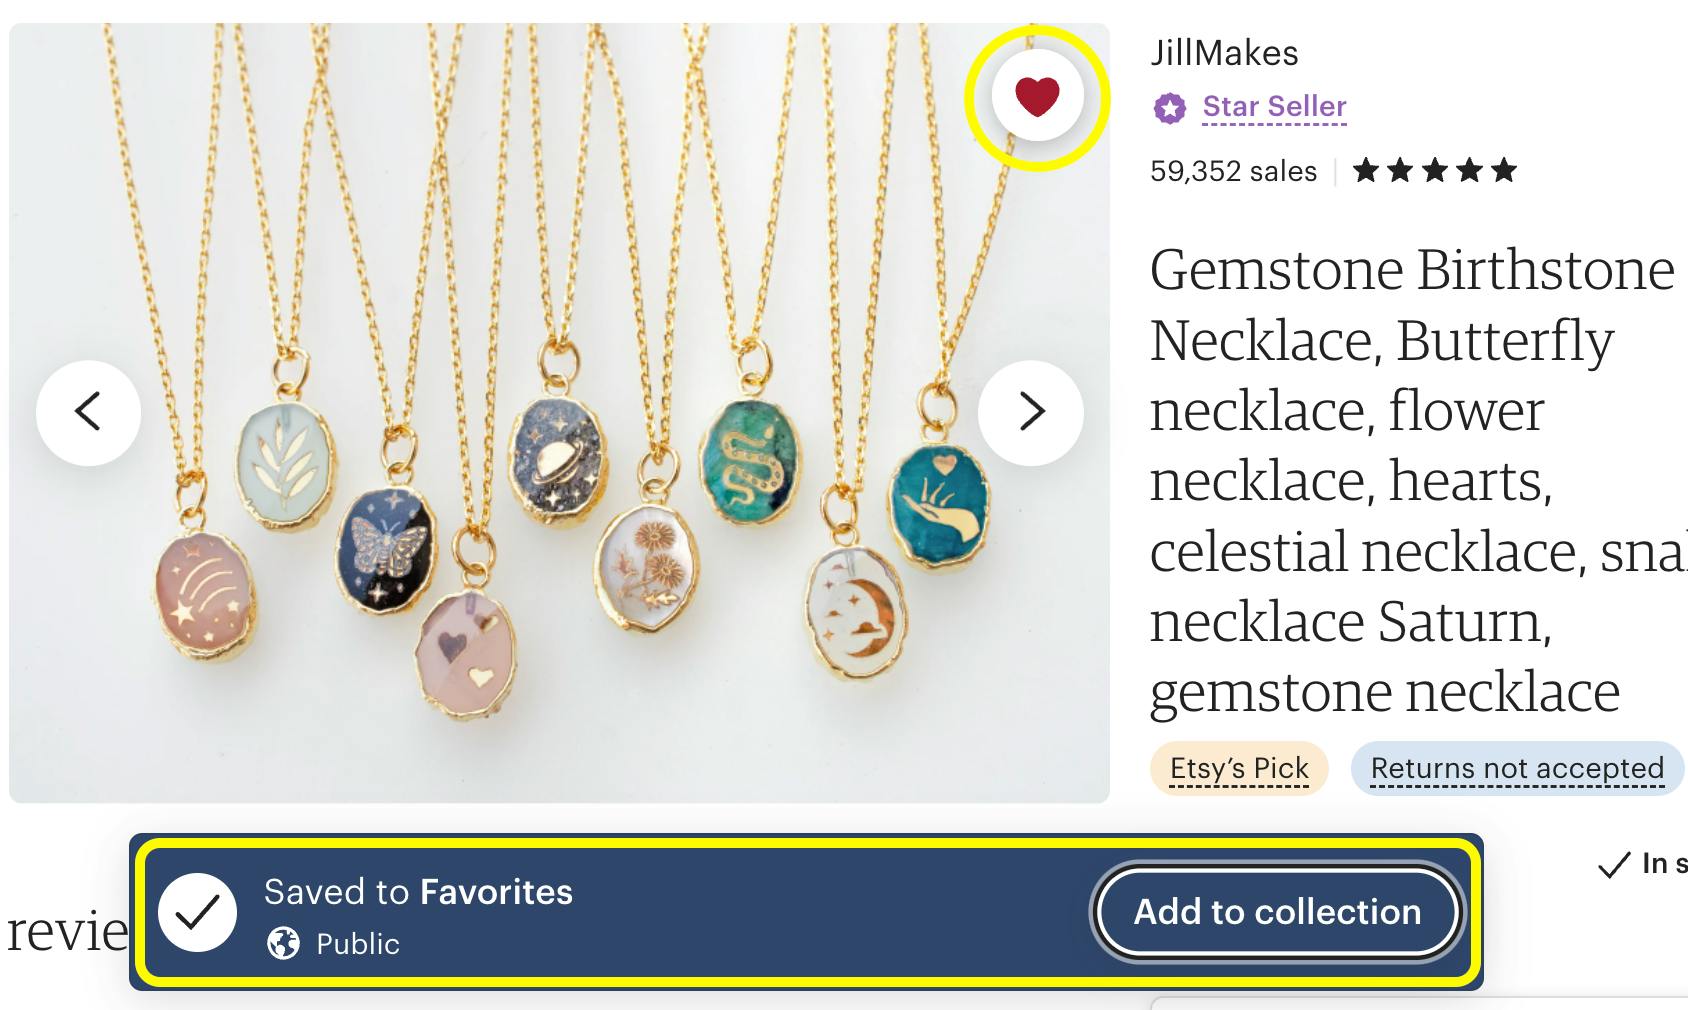 A screenshot of an Etsy product that has been favorited.